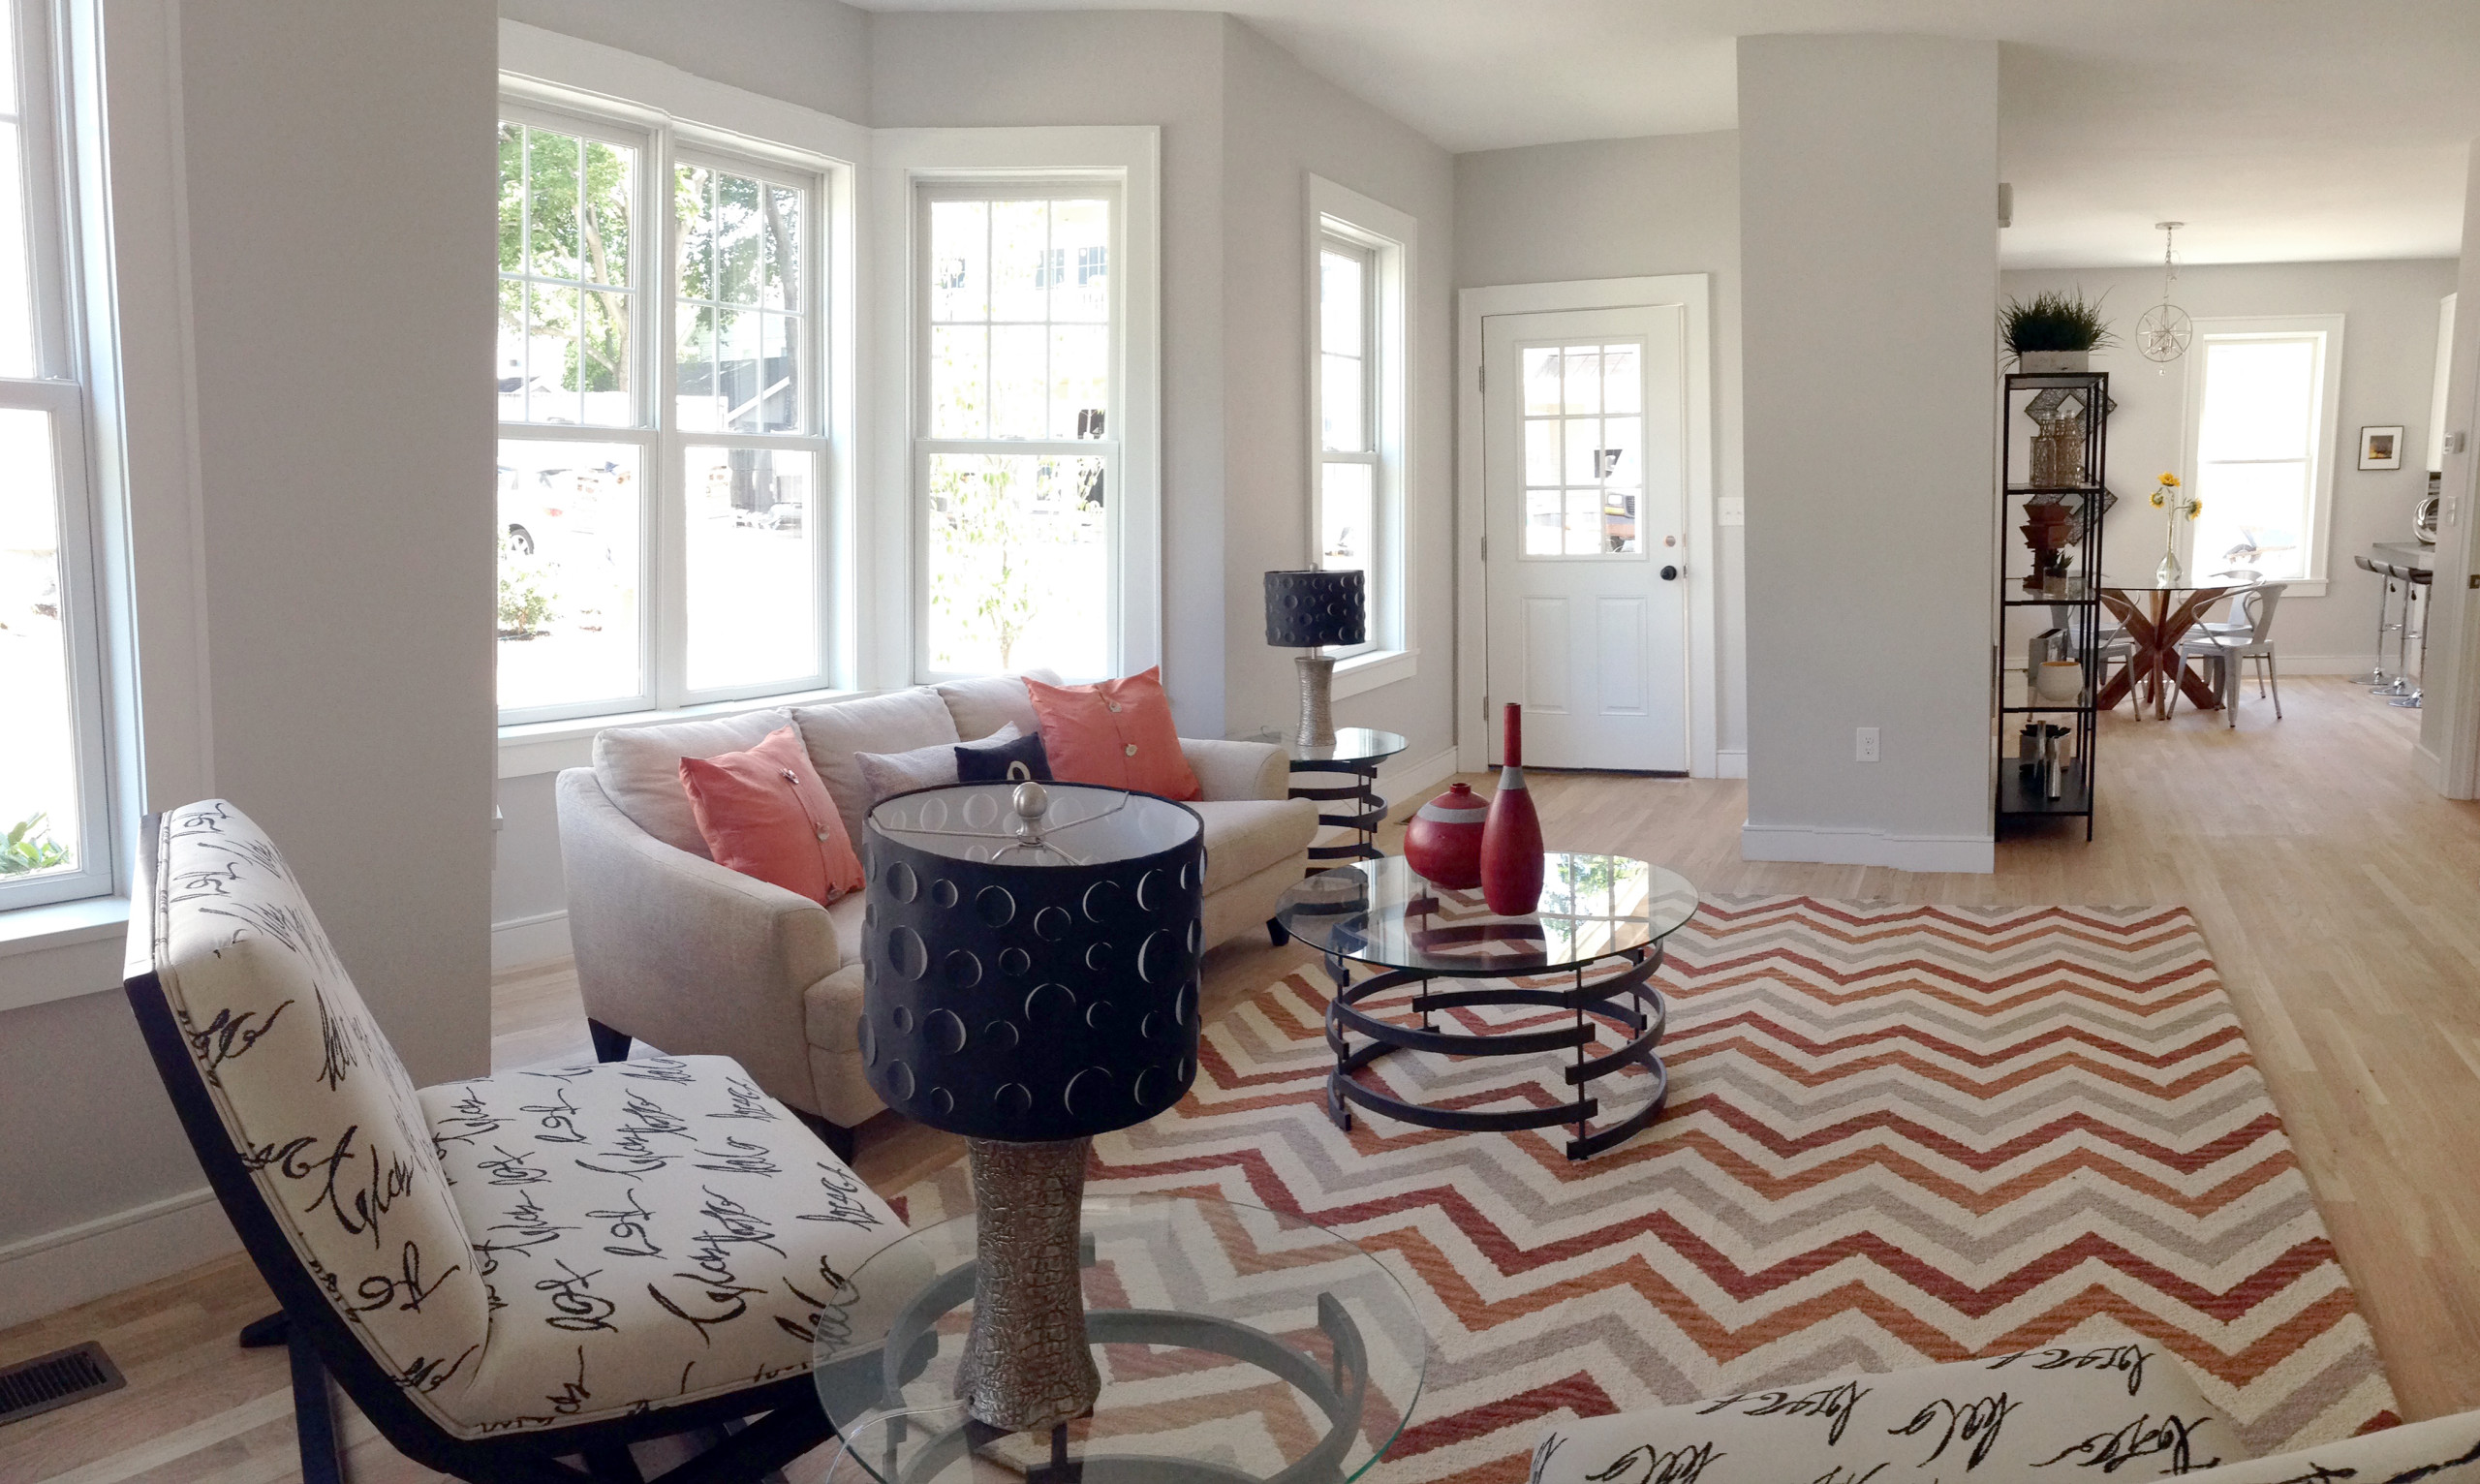 North facing living room has large bay windows and light gray walls to  increase - Transitional - Living Room - Boston - by Pfaff Color & Design |  Houzz